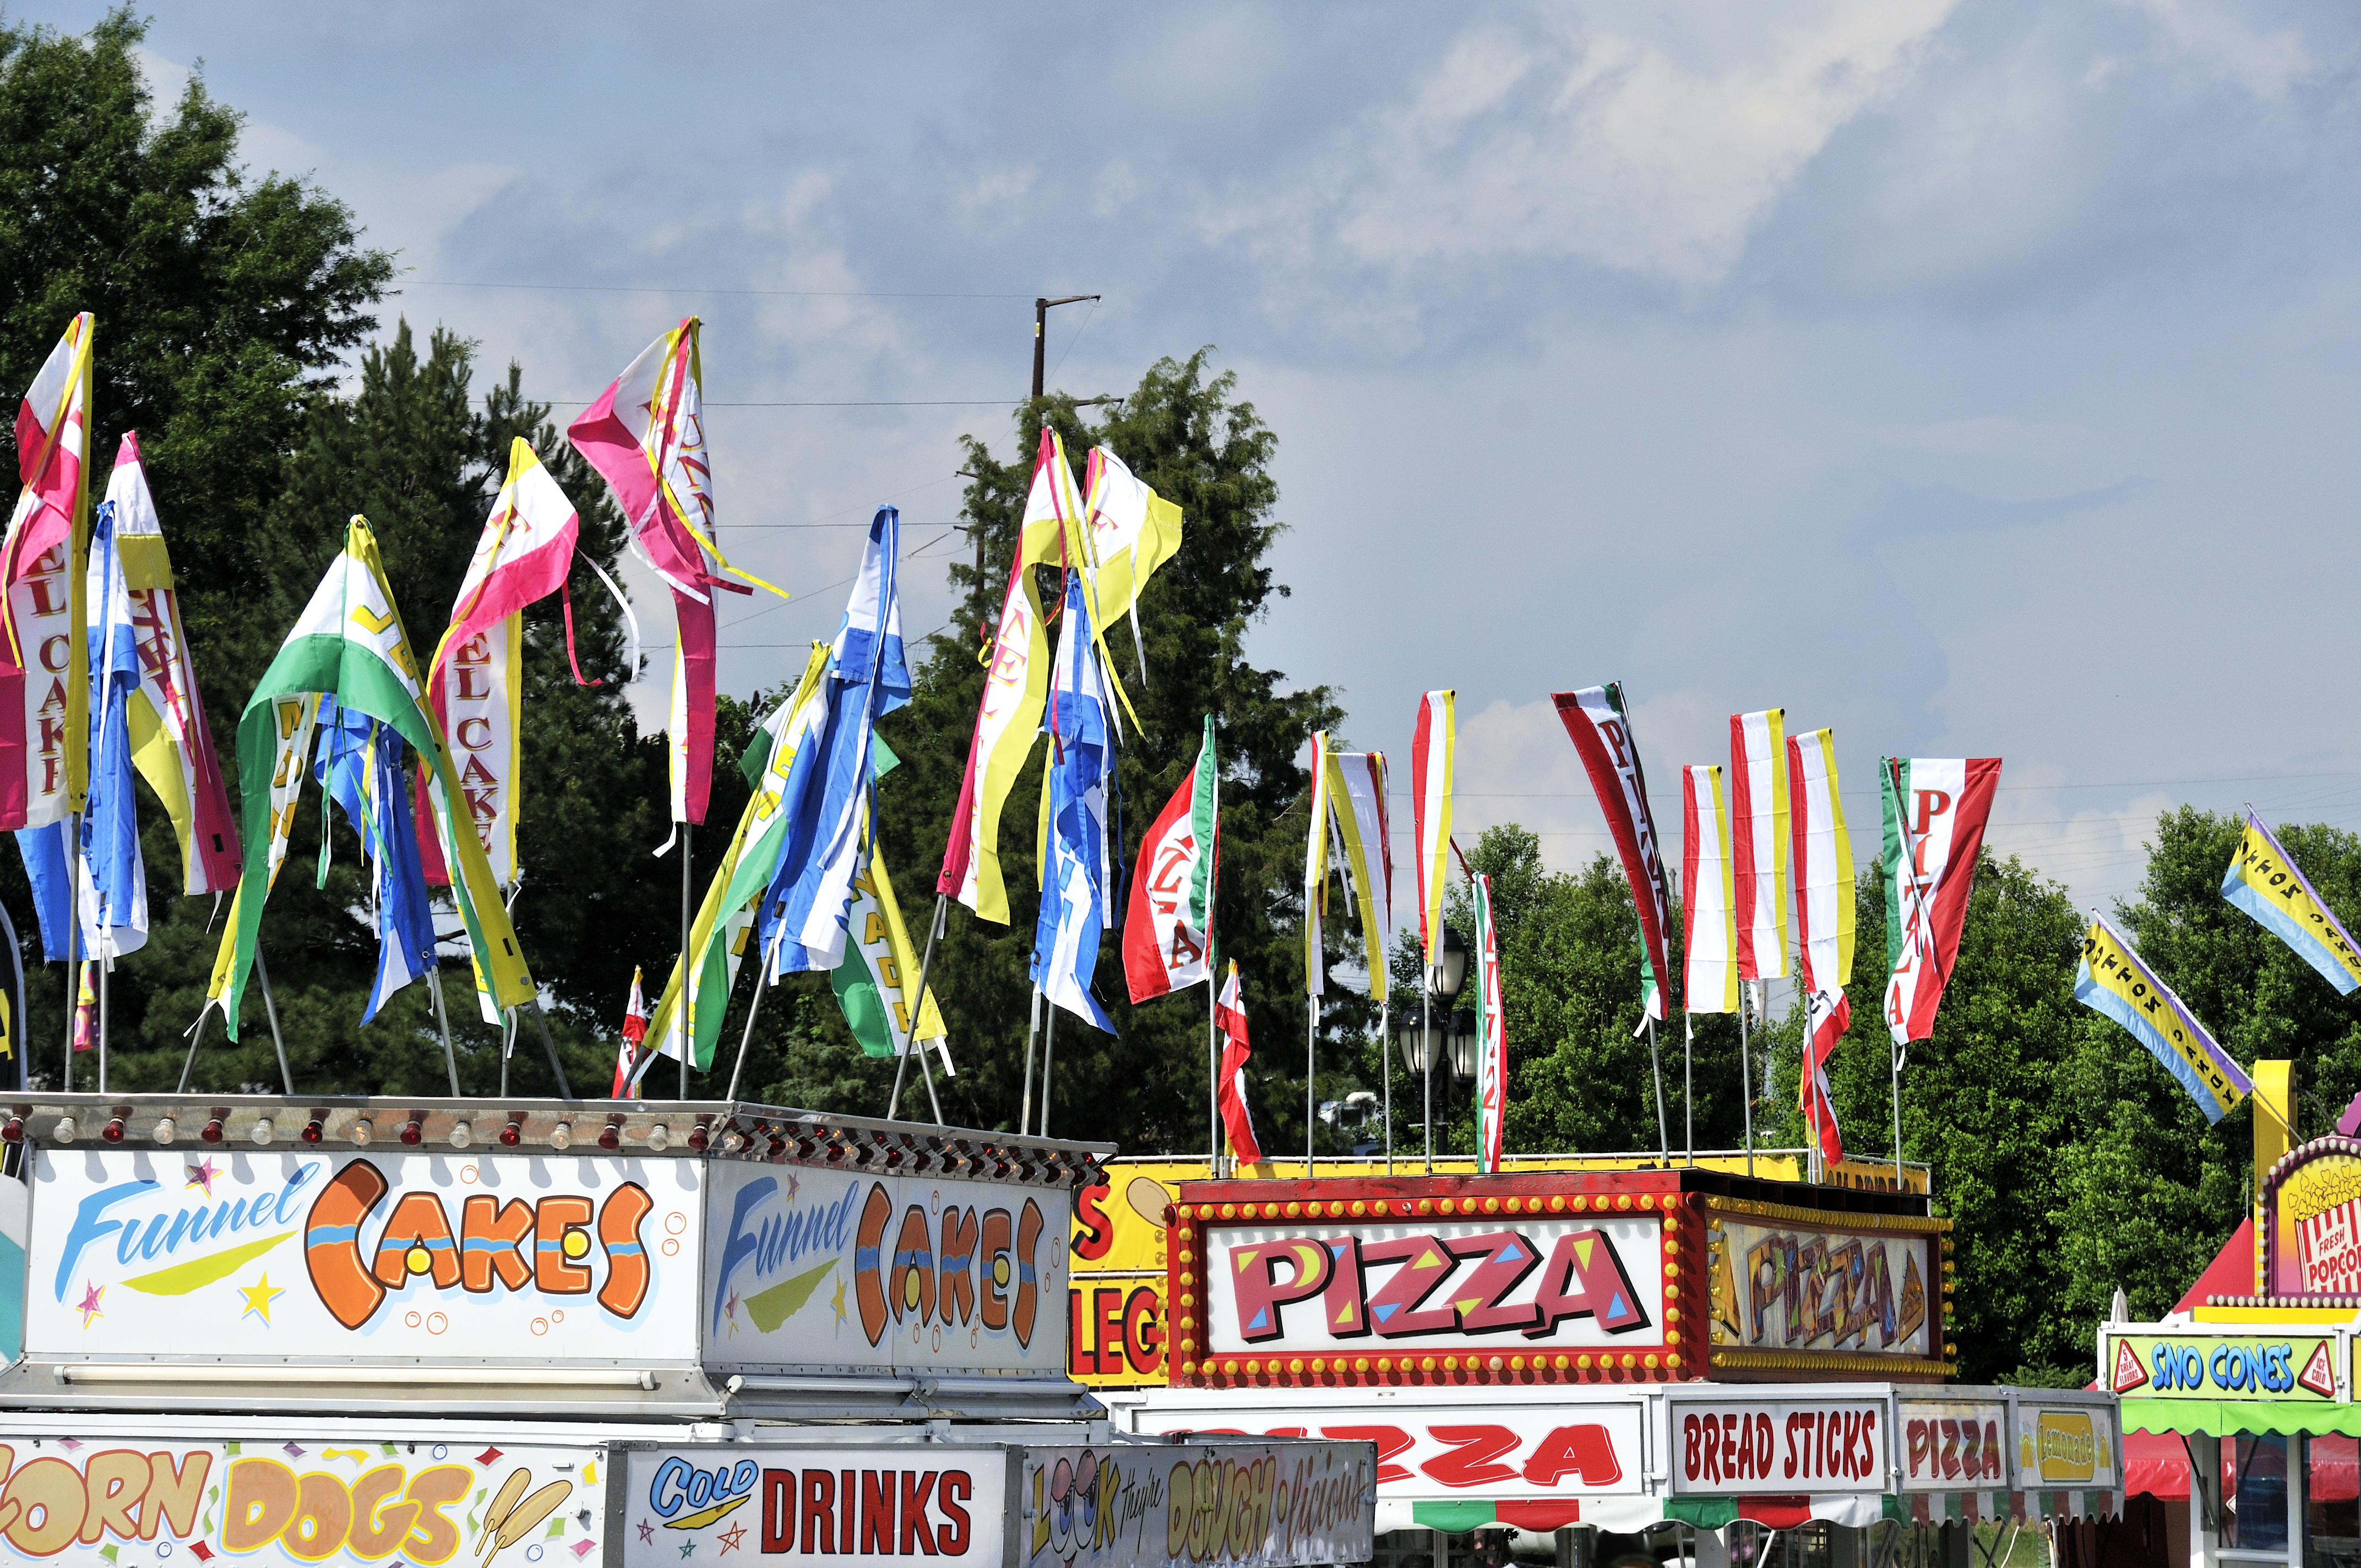 Multiple carnival food stands with colorful flags and signs 